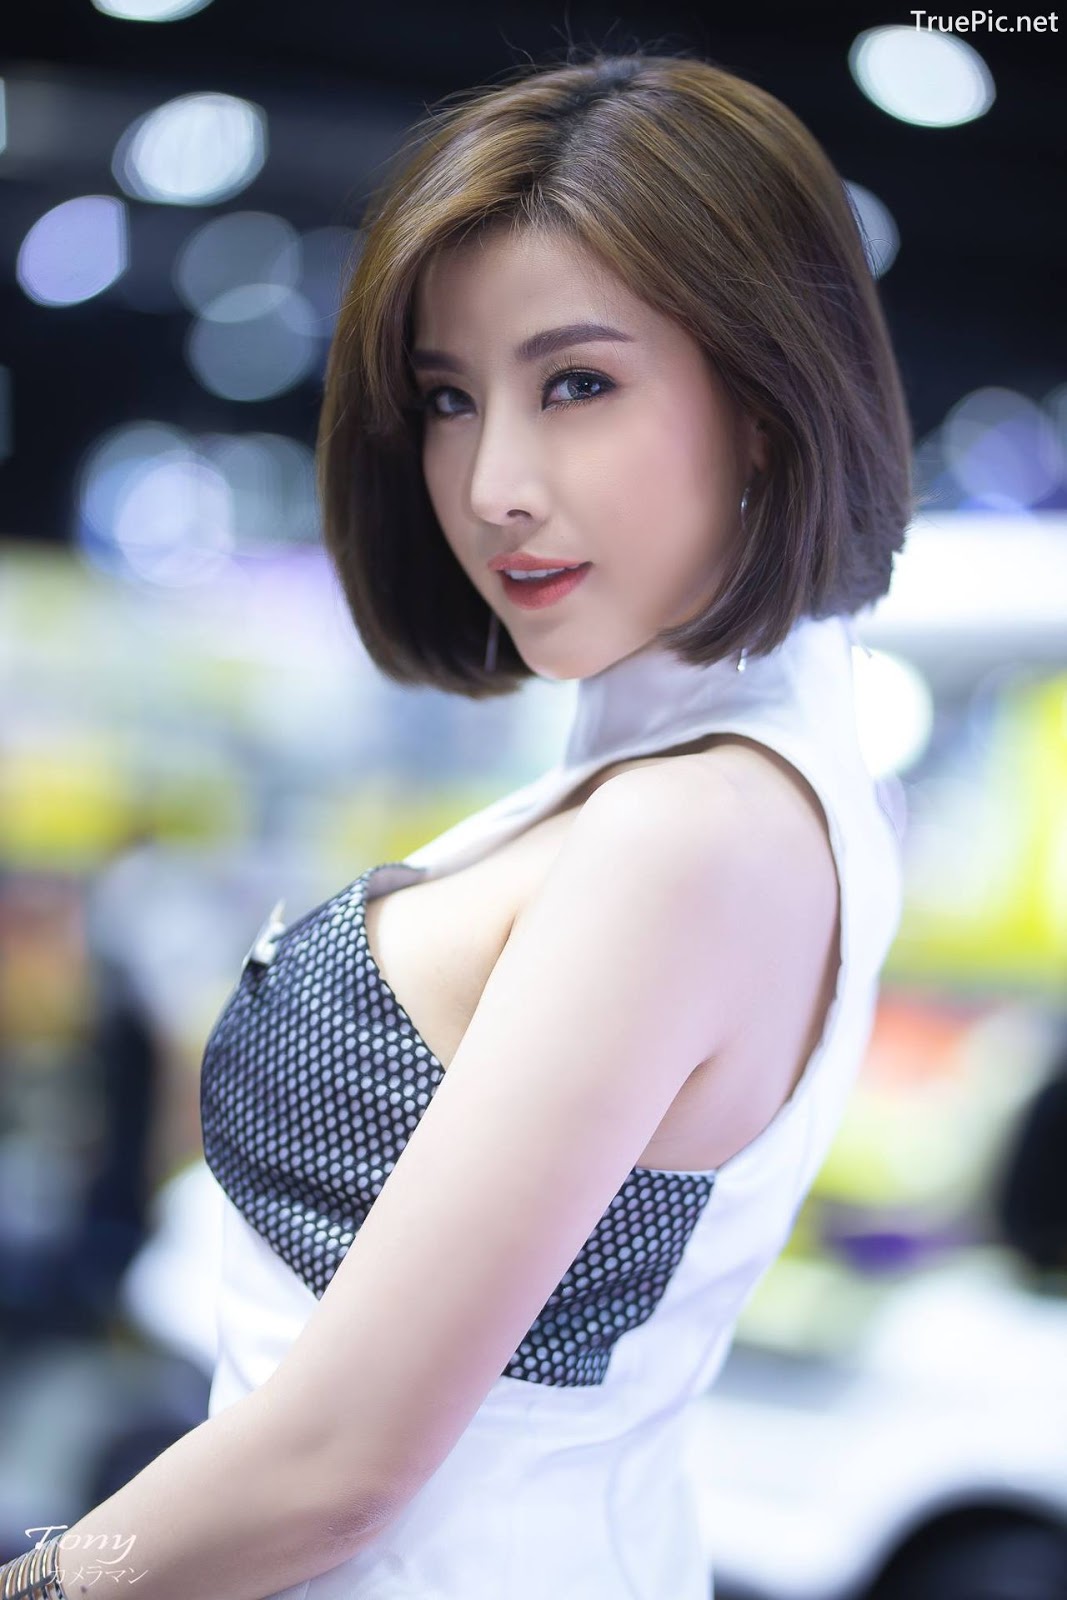 Image-Thailand-Hot-Model-Thai-Racing-Girl-At-Motor-Expo-2018-TruePic.net- Picture-73